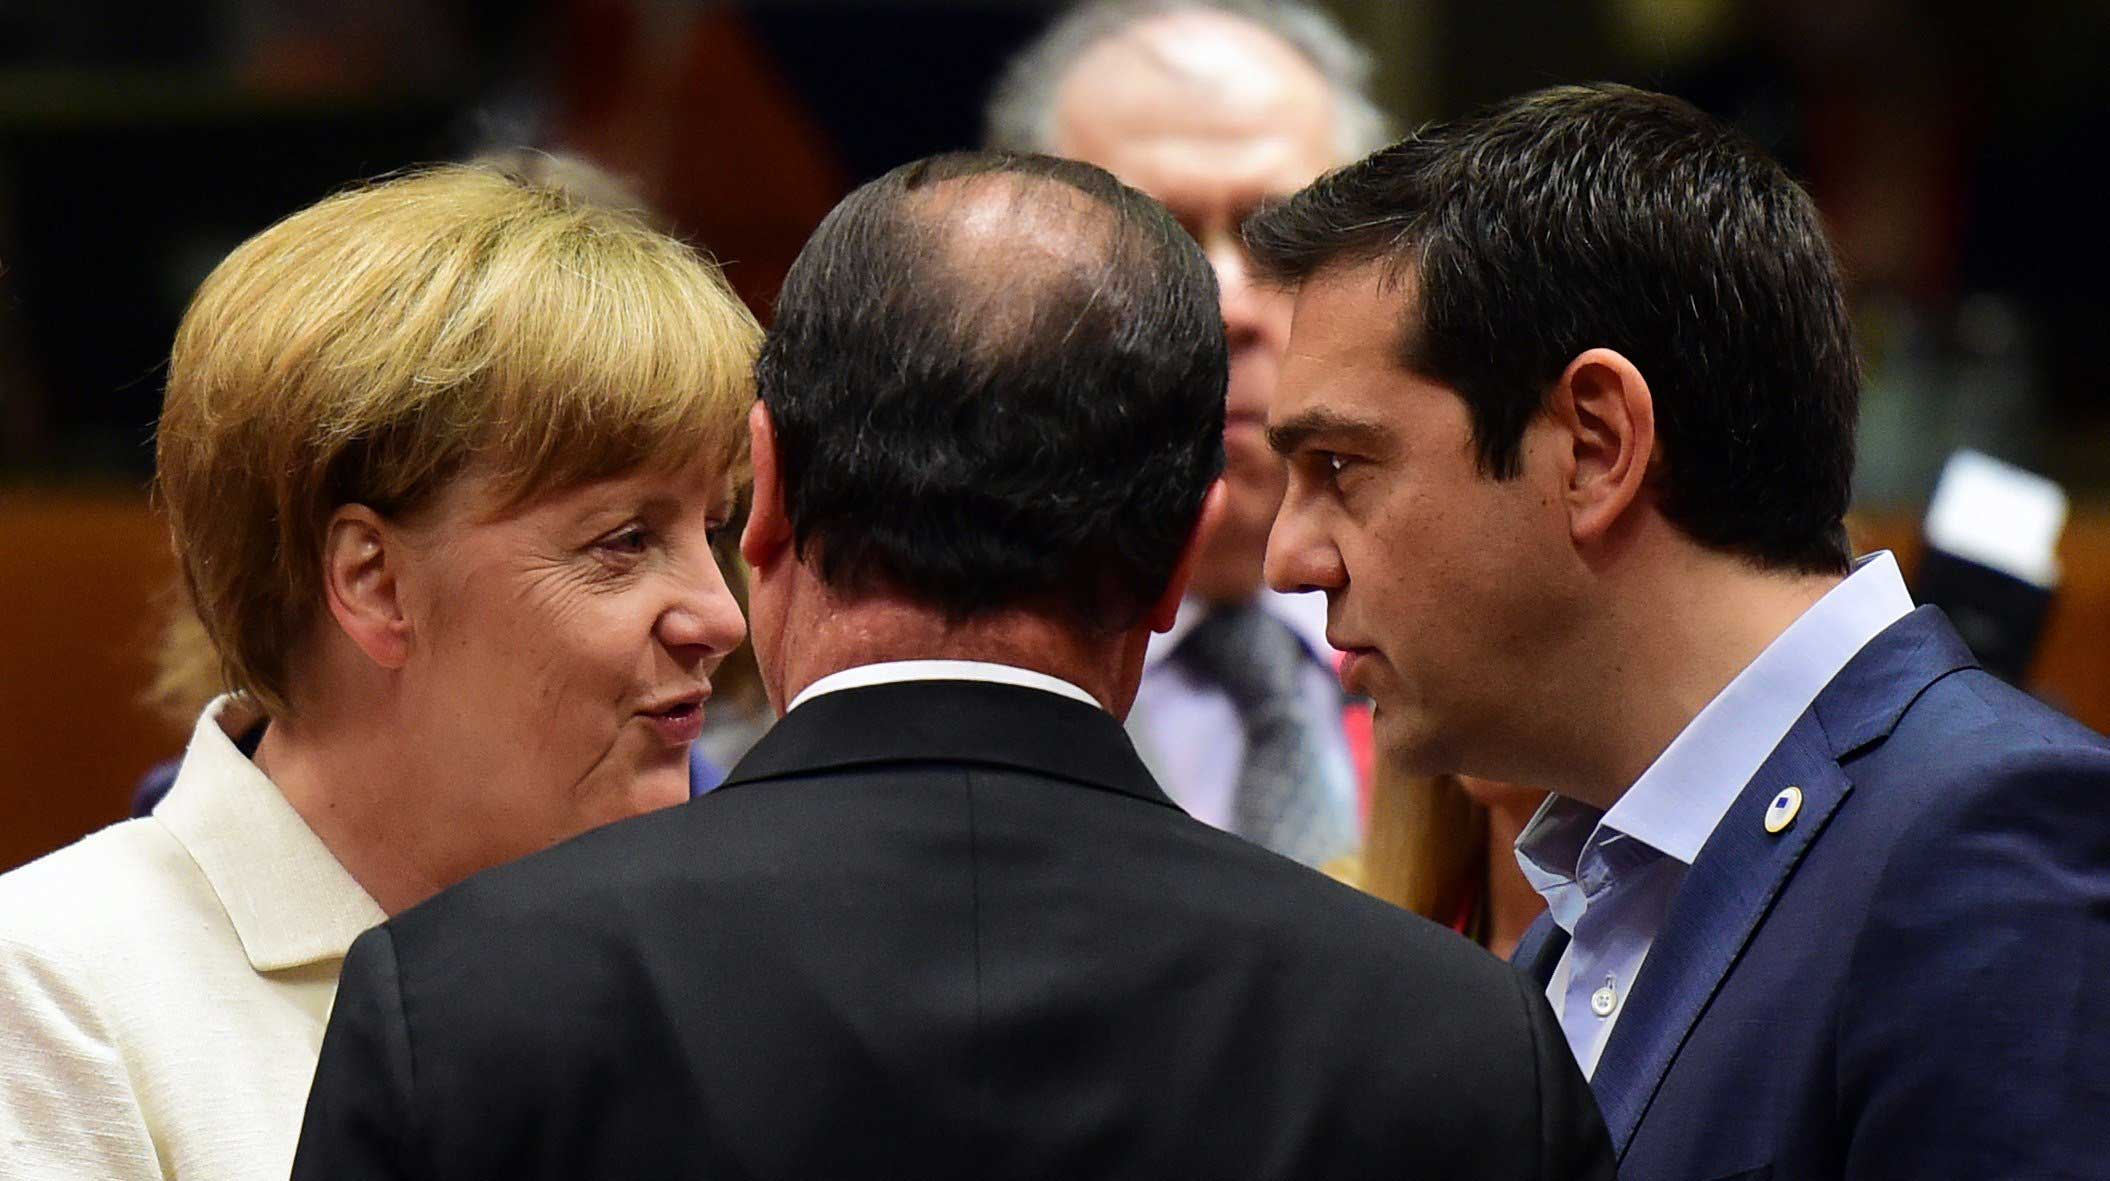 From left: German Chancellor Angela Merkel, French President Francois Hollande, and Greek Prime Minister Alexis Tsipras confer prior to the start of a summit of Eurozone heads of state in Brussels on July 12, 2015. (John MacDougall—AFP/Getty Images)